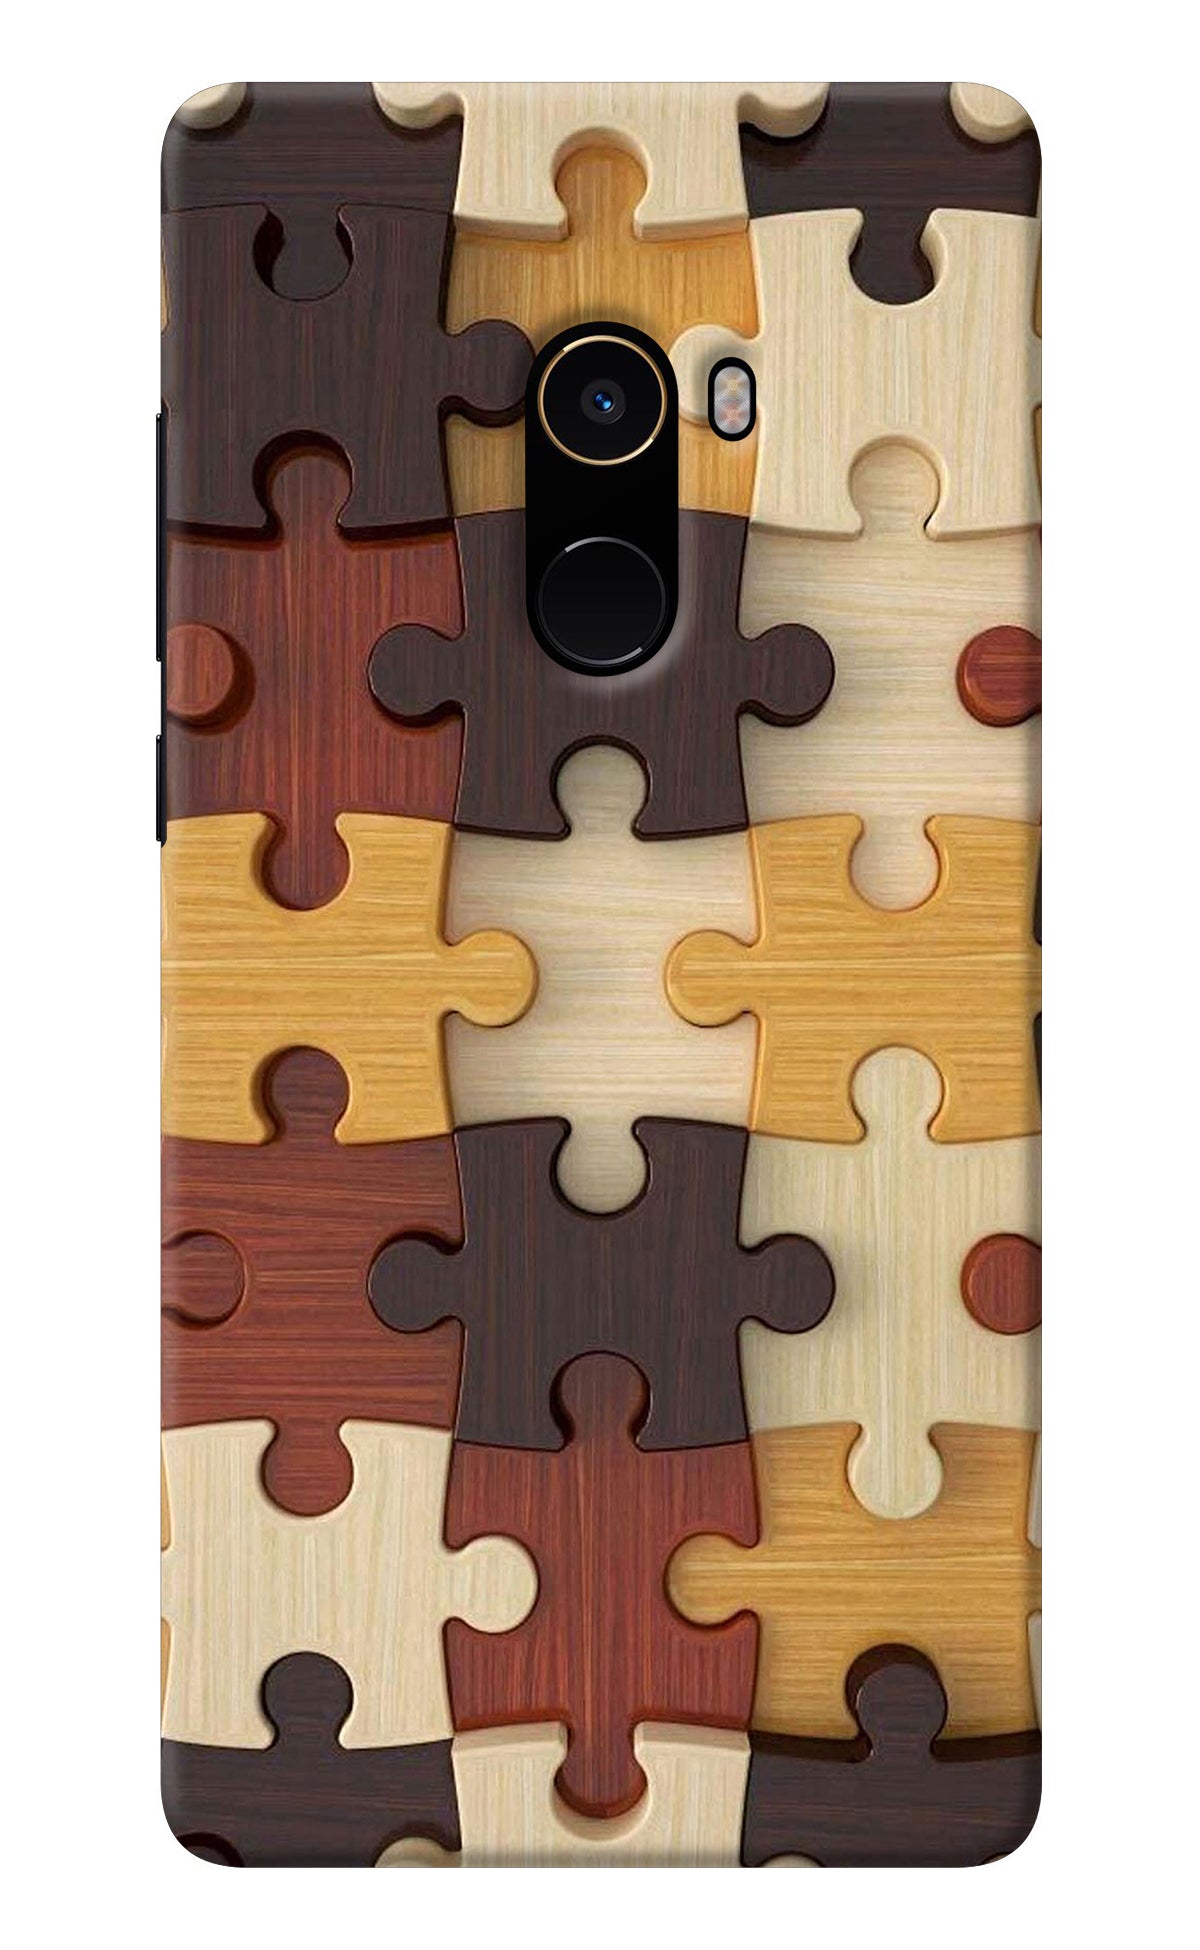 Wooden Puzzle Mi Mix 2 Back Cover